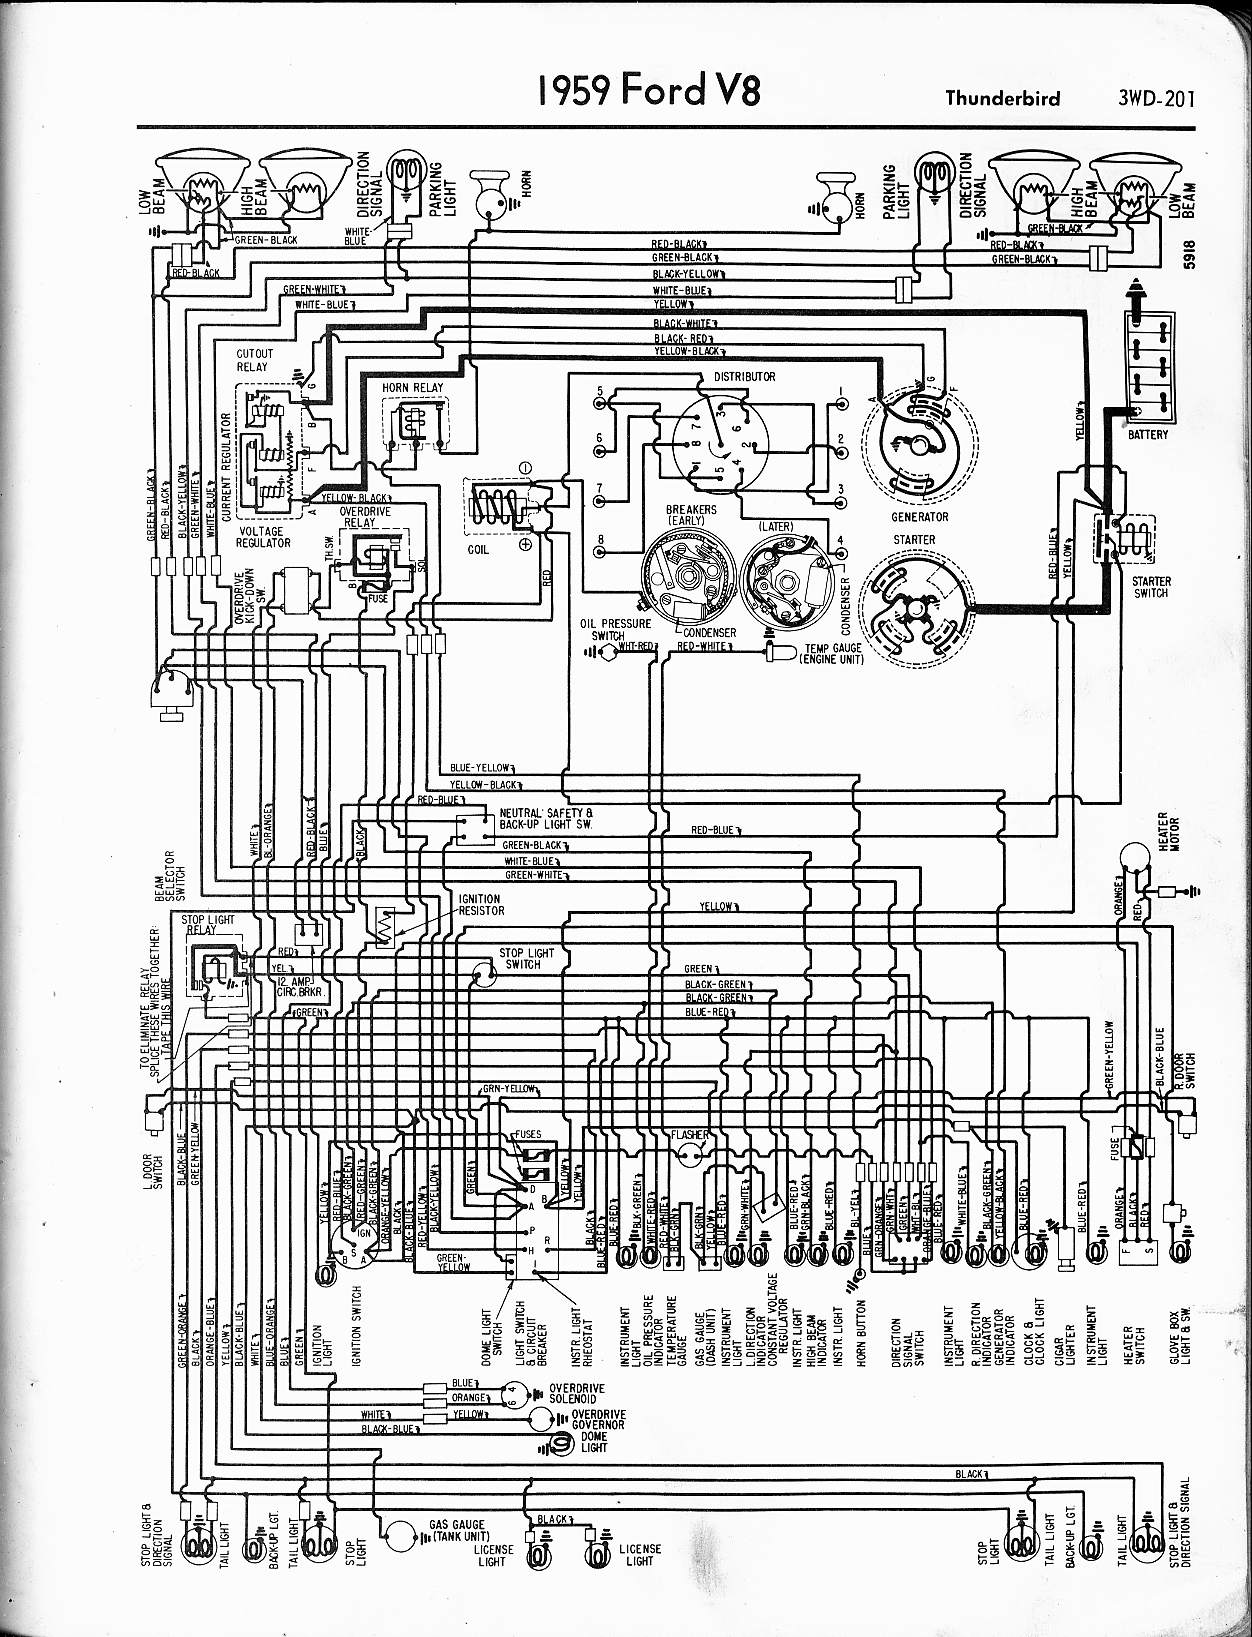 http://www.oldcarmanualproject.com/tOCMP/wiring/5765wiring%20diagrams/Ford/MWire5765-201.jpg